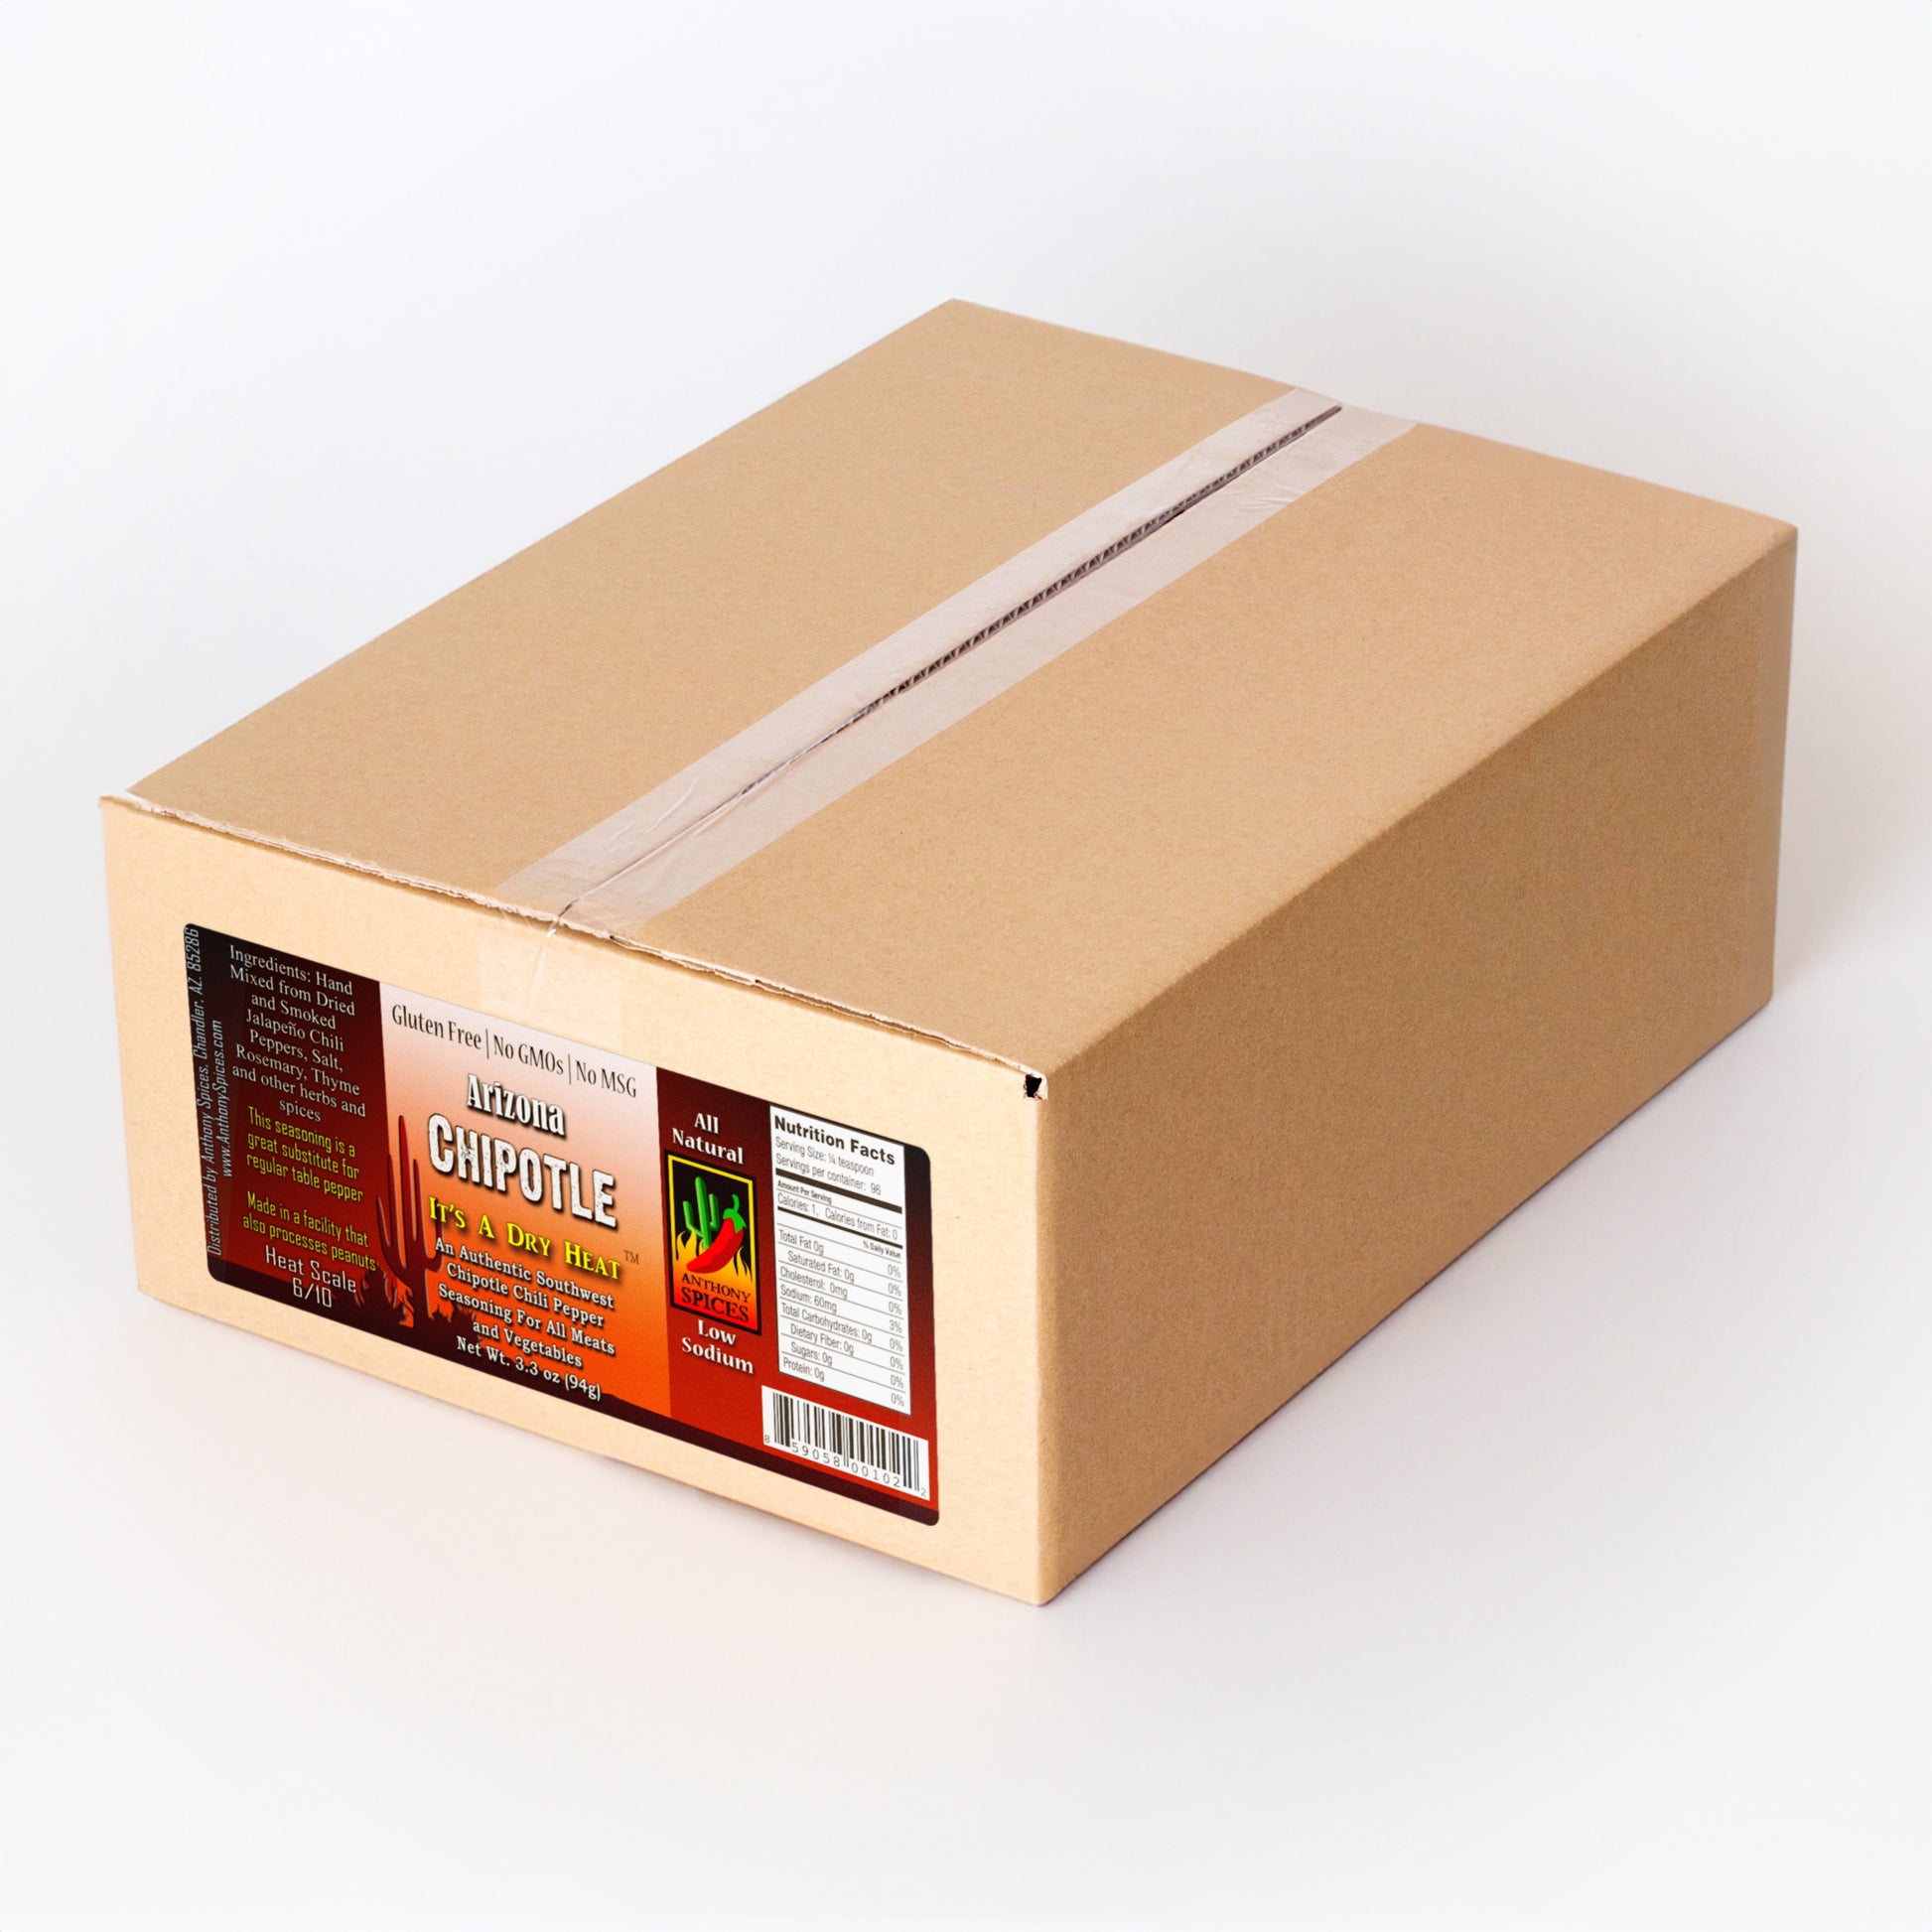 Case of 12 (3.3oz Bottles) of Arizona Chipotle Spice - Closed shipping box with label